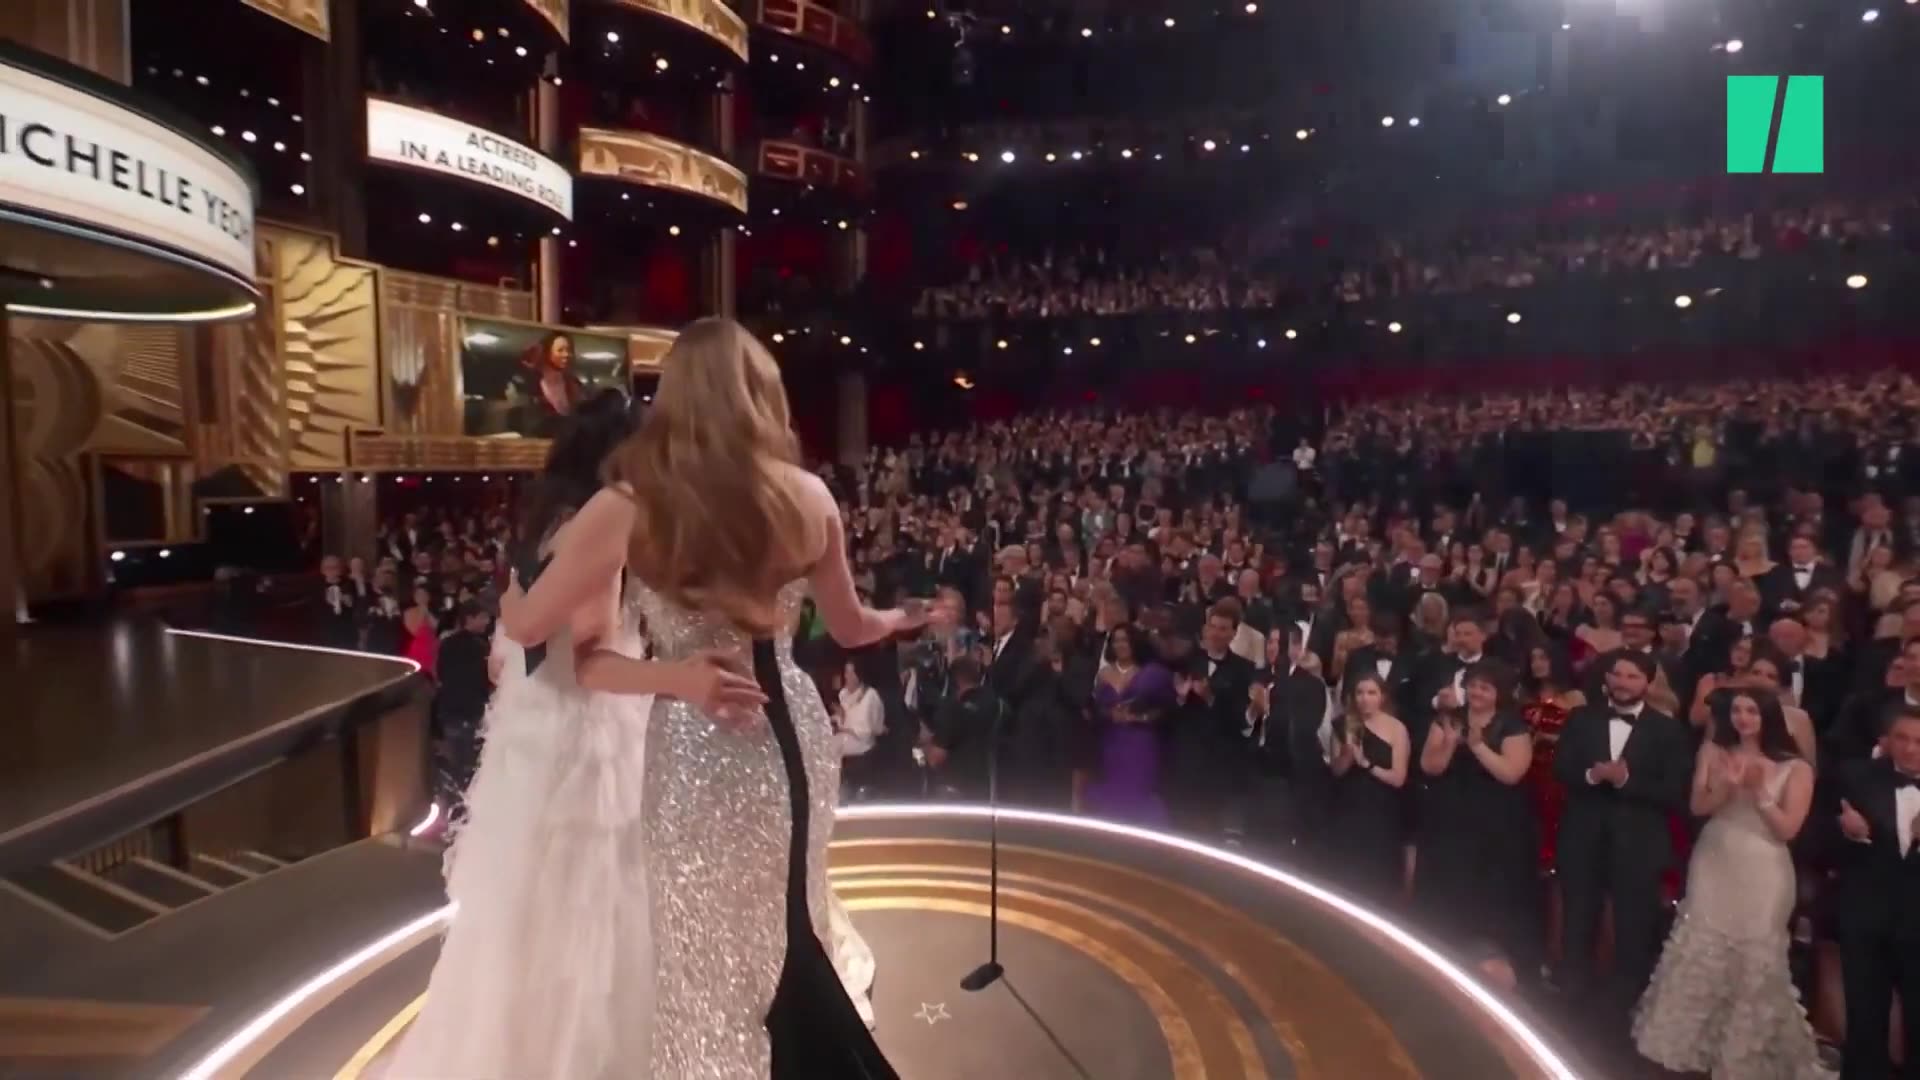 This was the most exciting speeches at the Oscars 2023